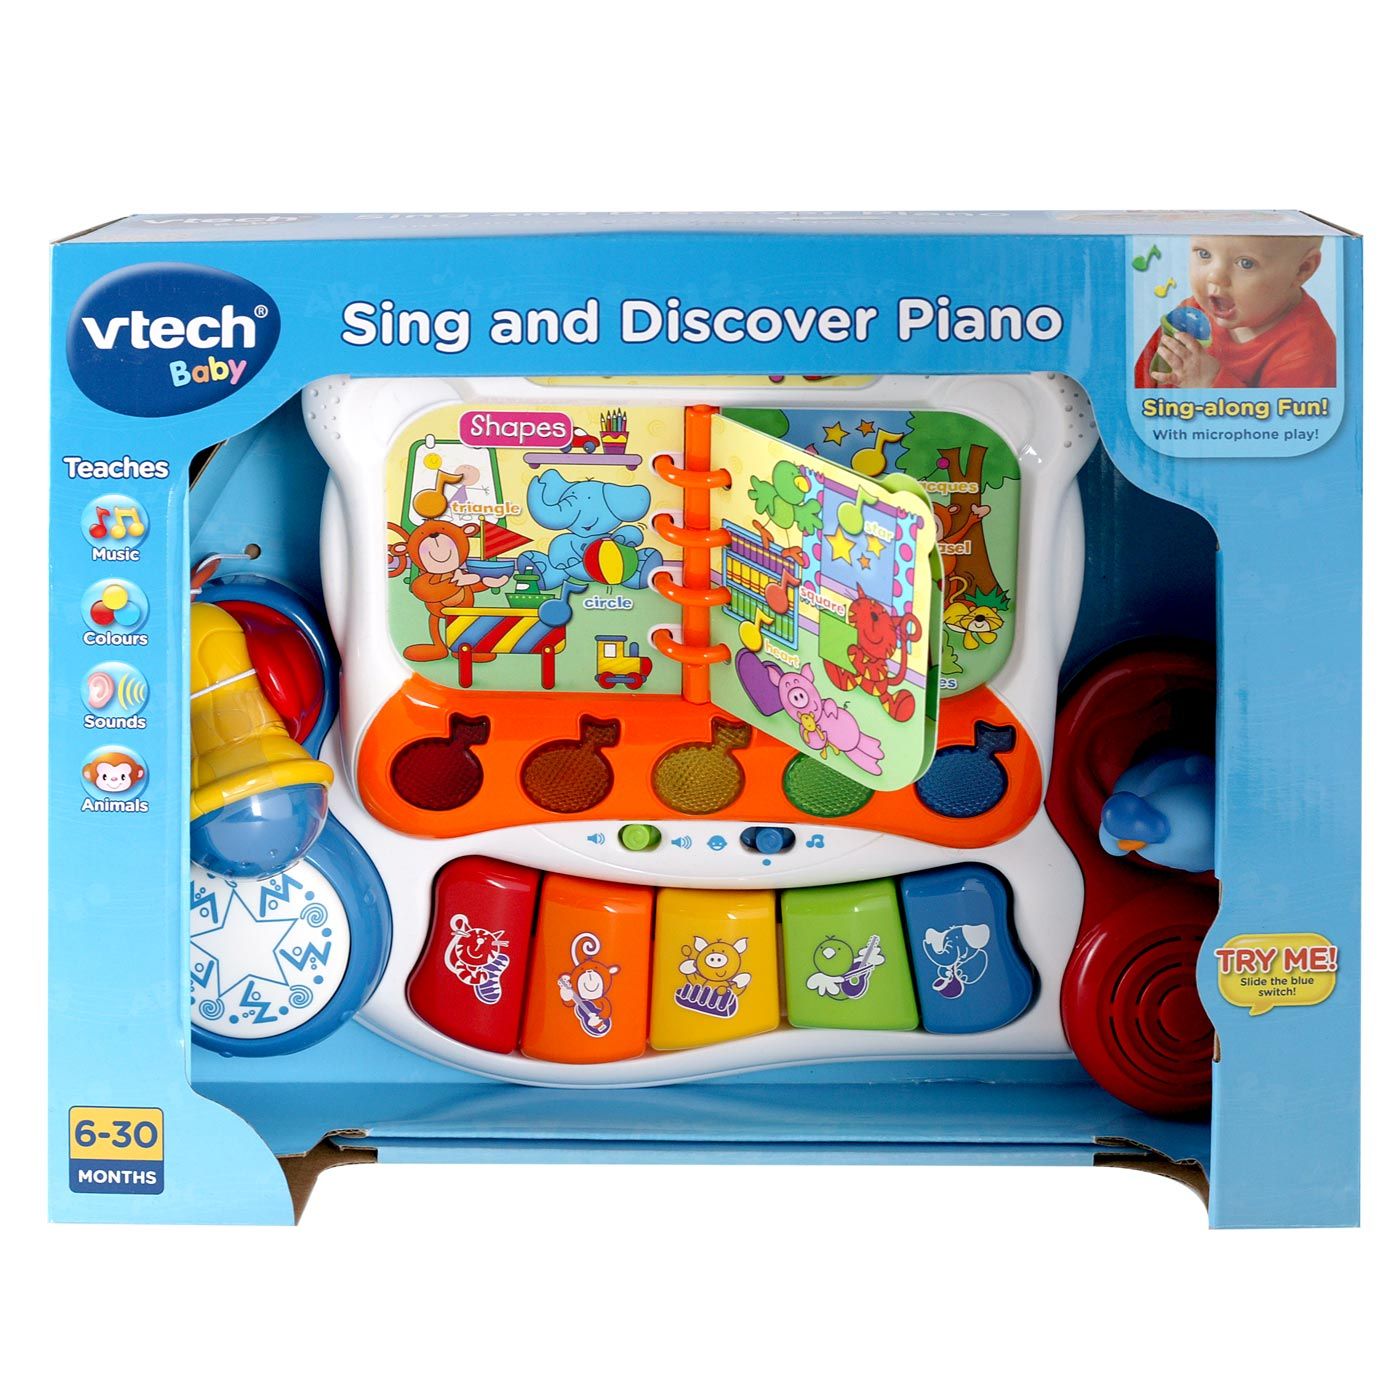 Vtech Sing and Discover Piano - 1